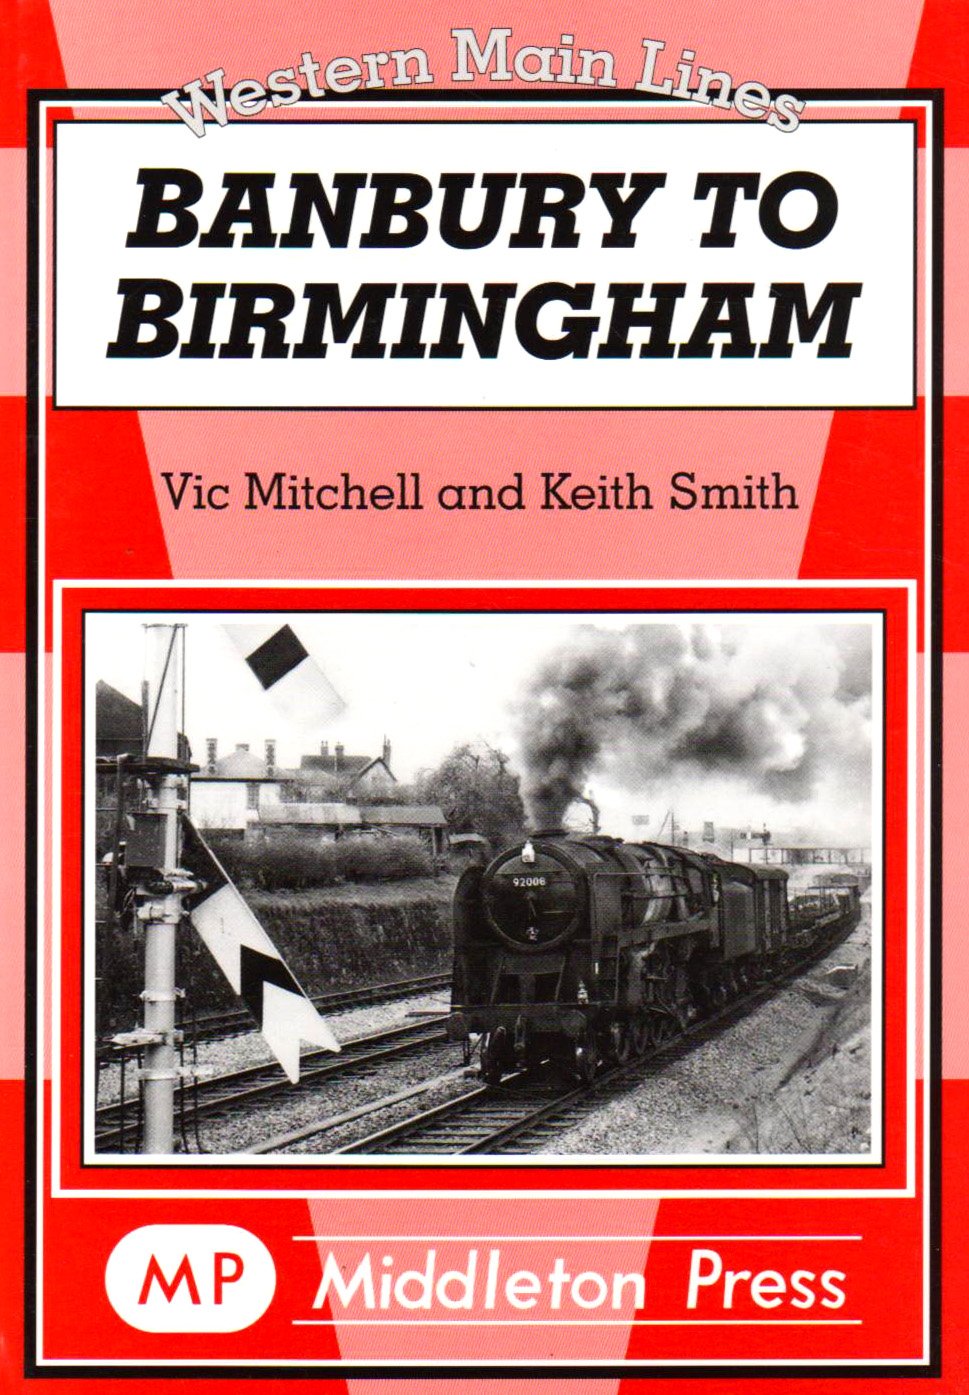 Western Main Lines Banbury to Birmingham OUT OF PRINT TO BE REPRINTED